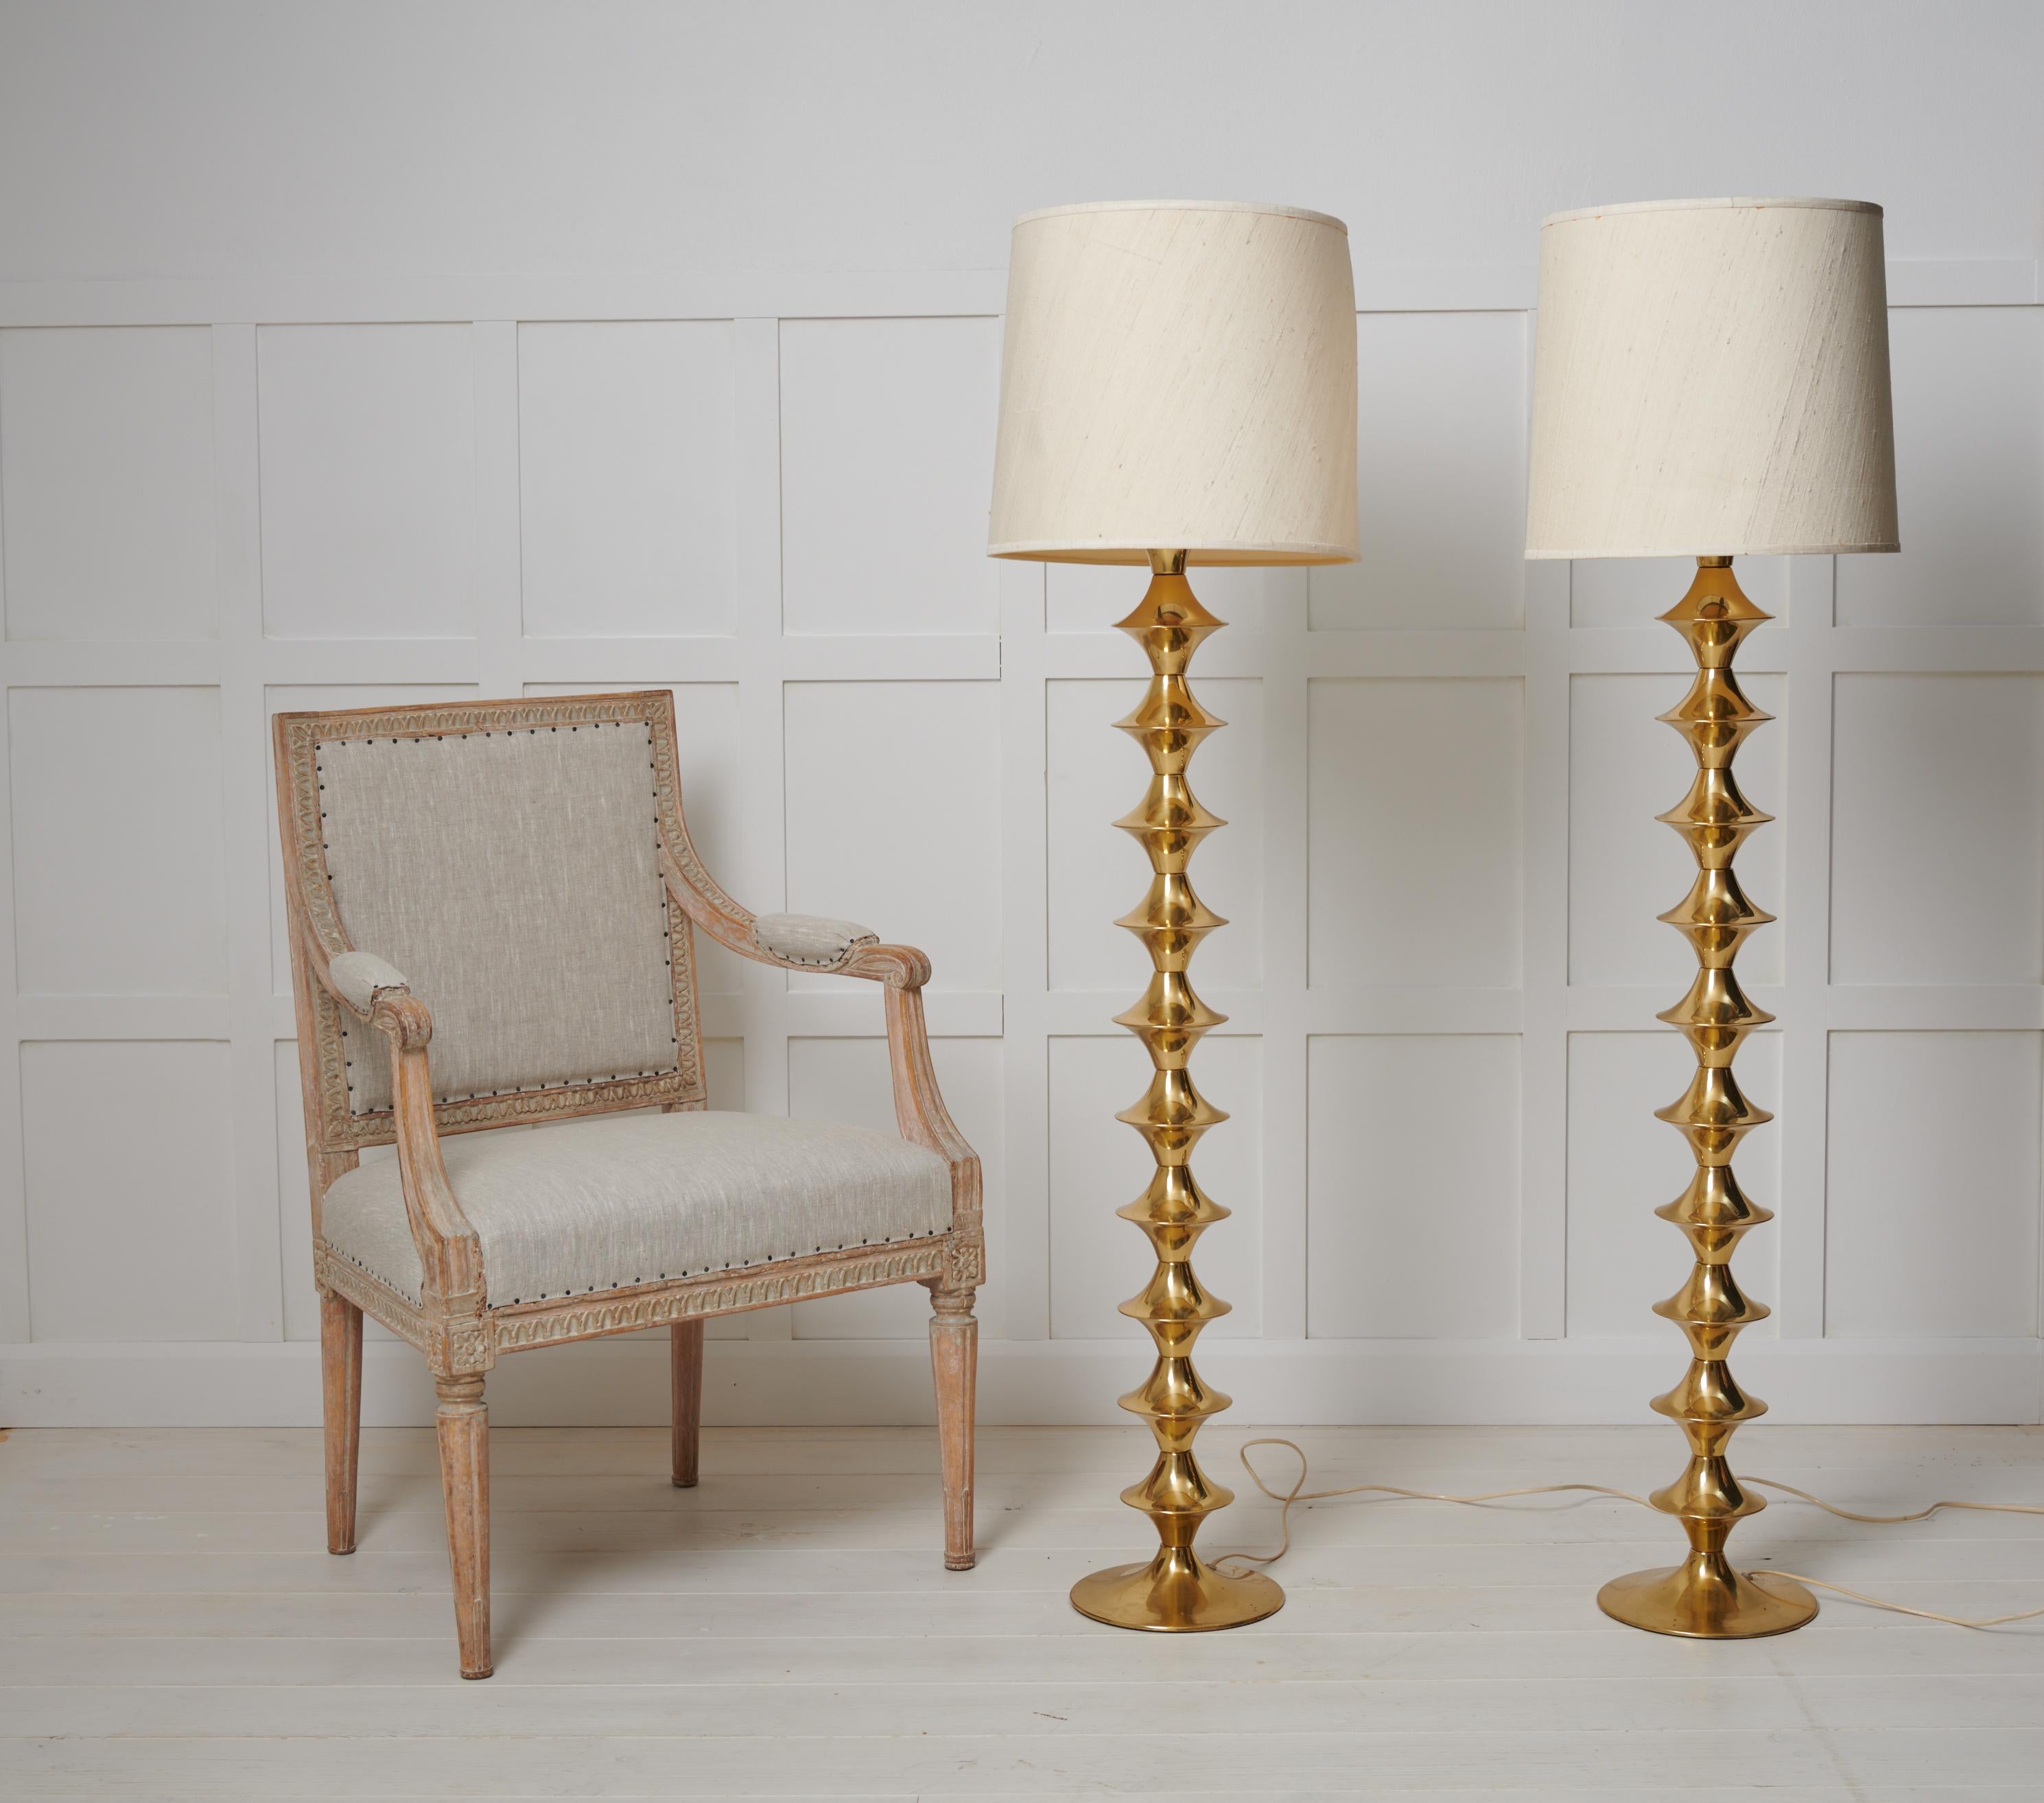 Scandinavian modern pair of brass floor lamps from Elit AB, made in Sweden around 1960s. The lamps are a classic midcentury design and can be used both side by and side and framing other interior objects. The base is a solid brass pole with a wavy